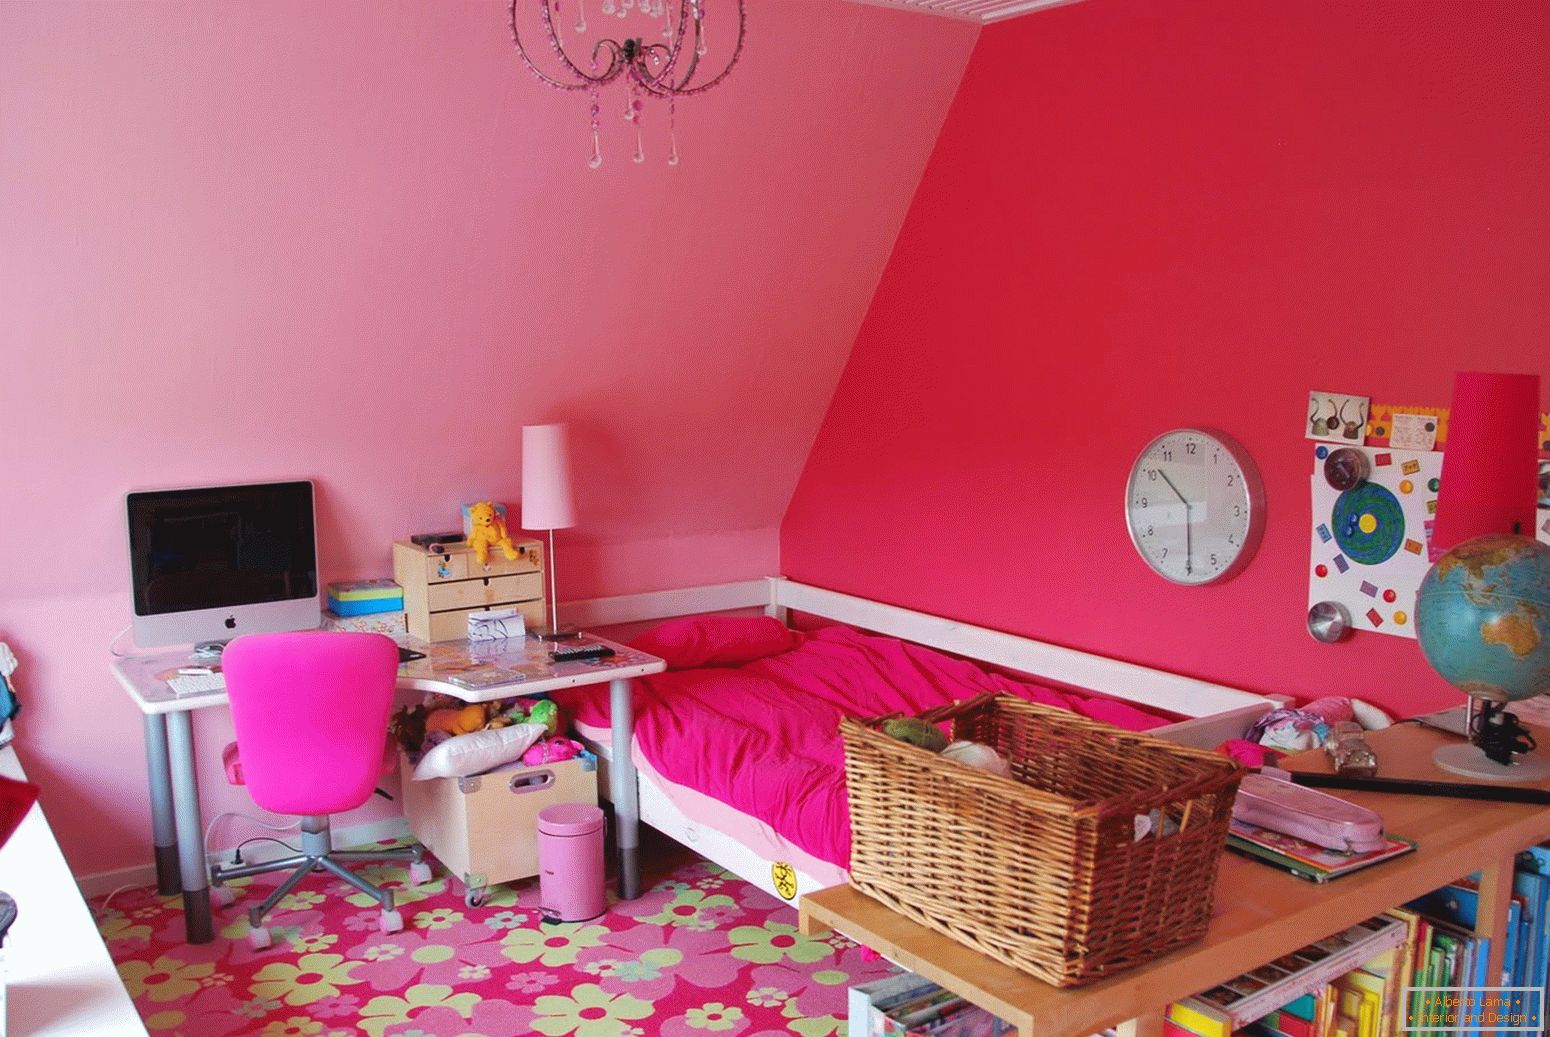 Bright walls in the nursery for the girl